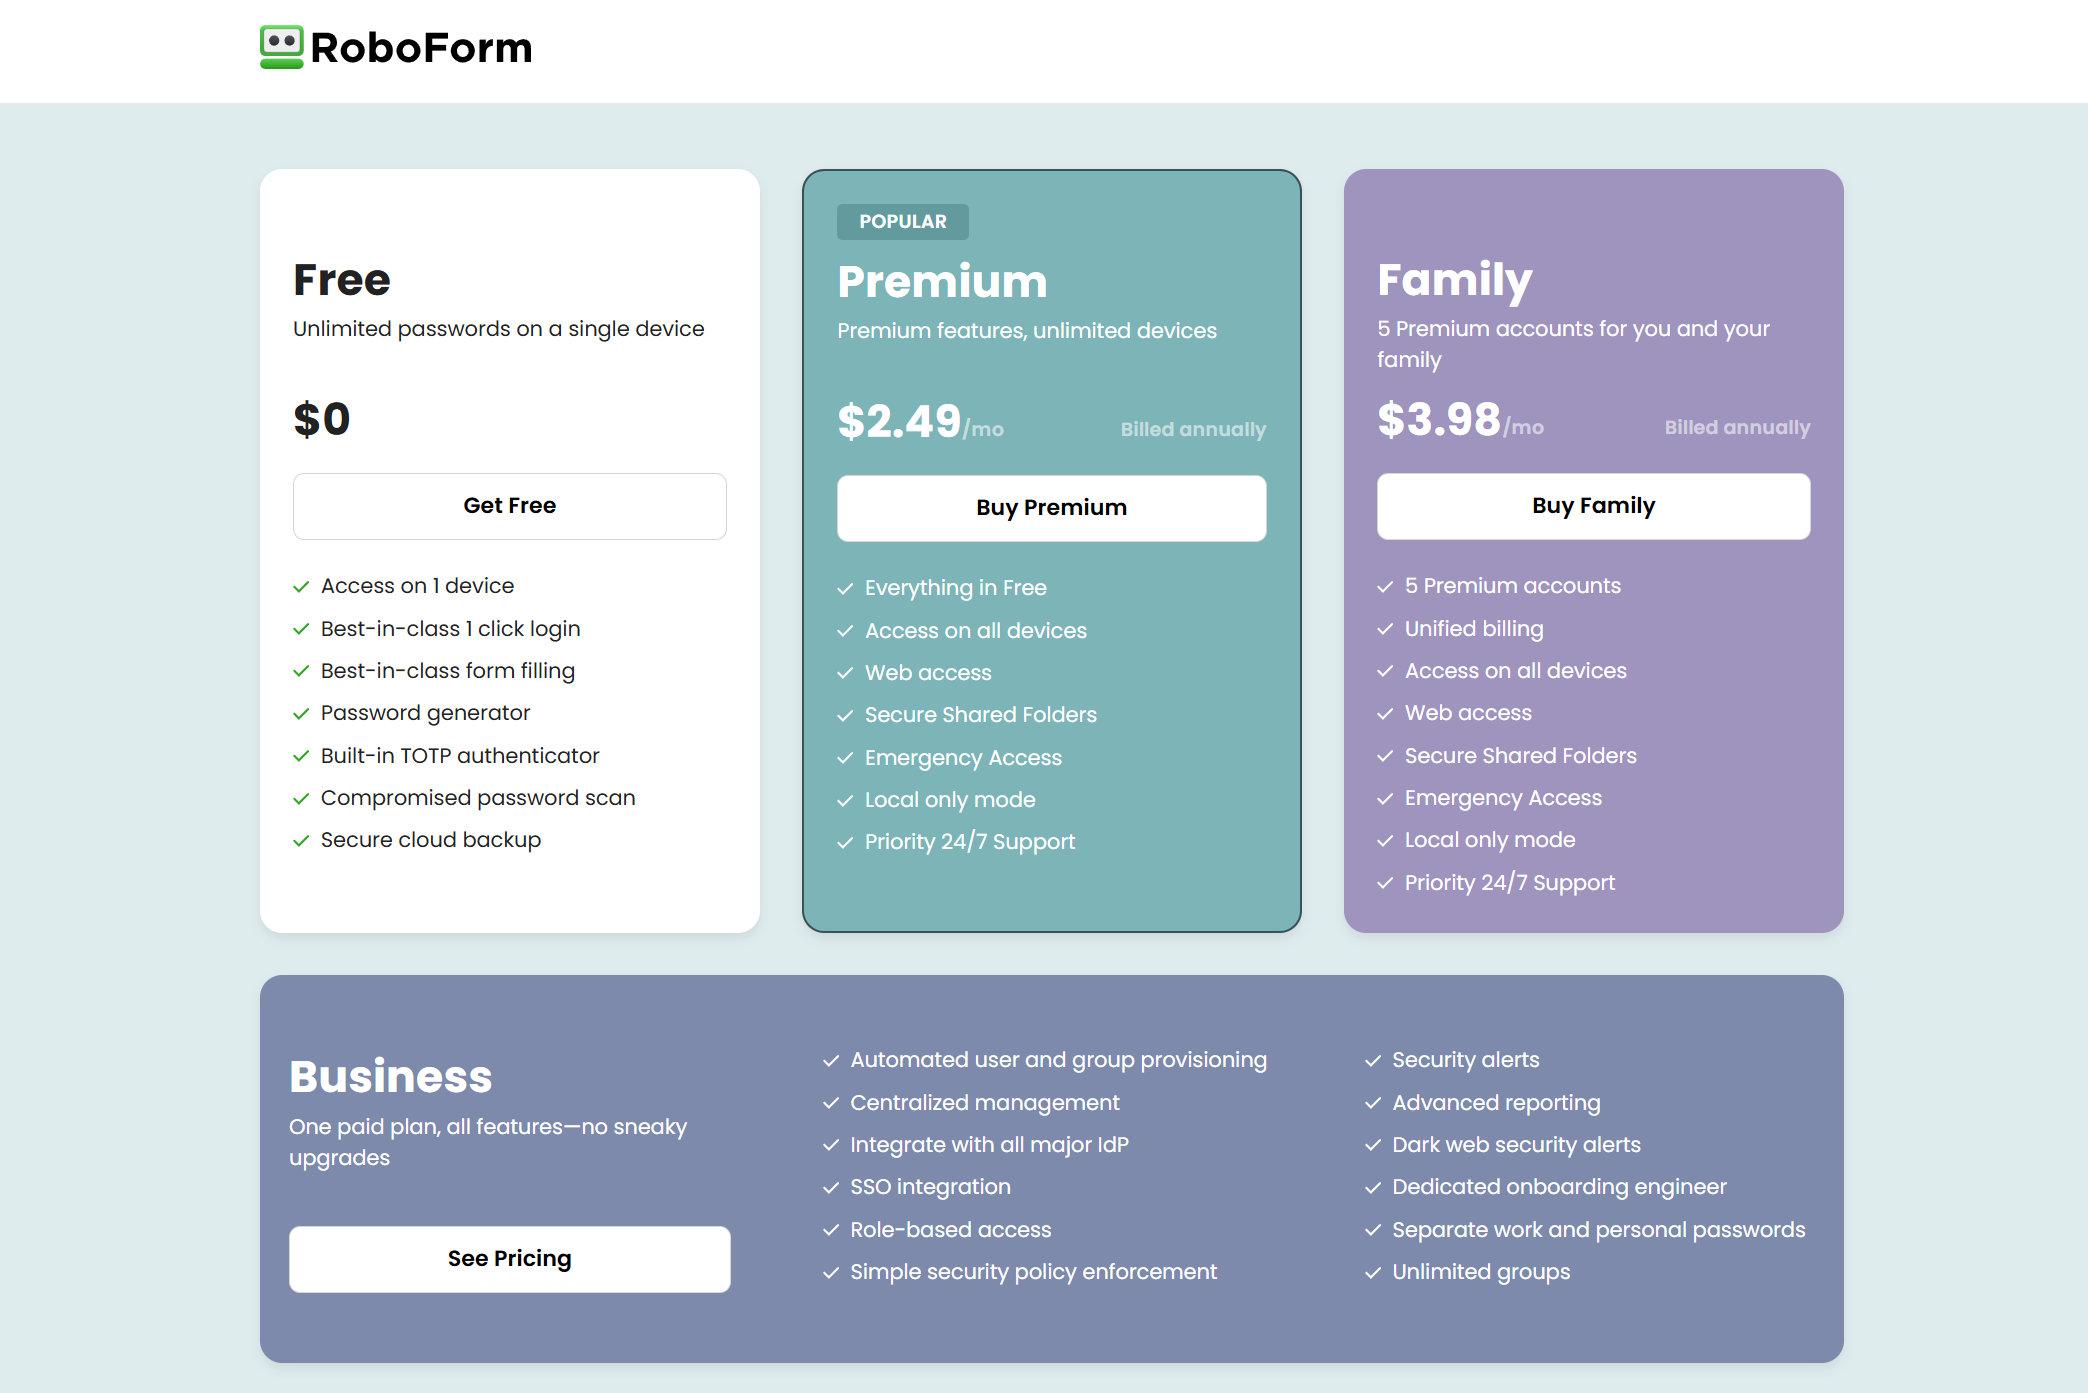 RoboForm has a free version and plans for individuals and families.